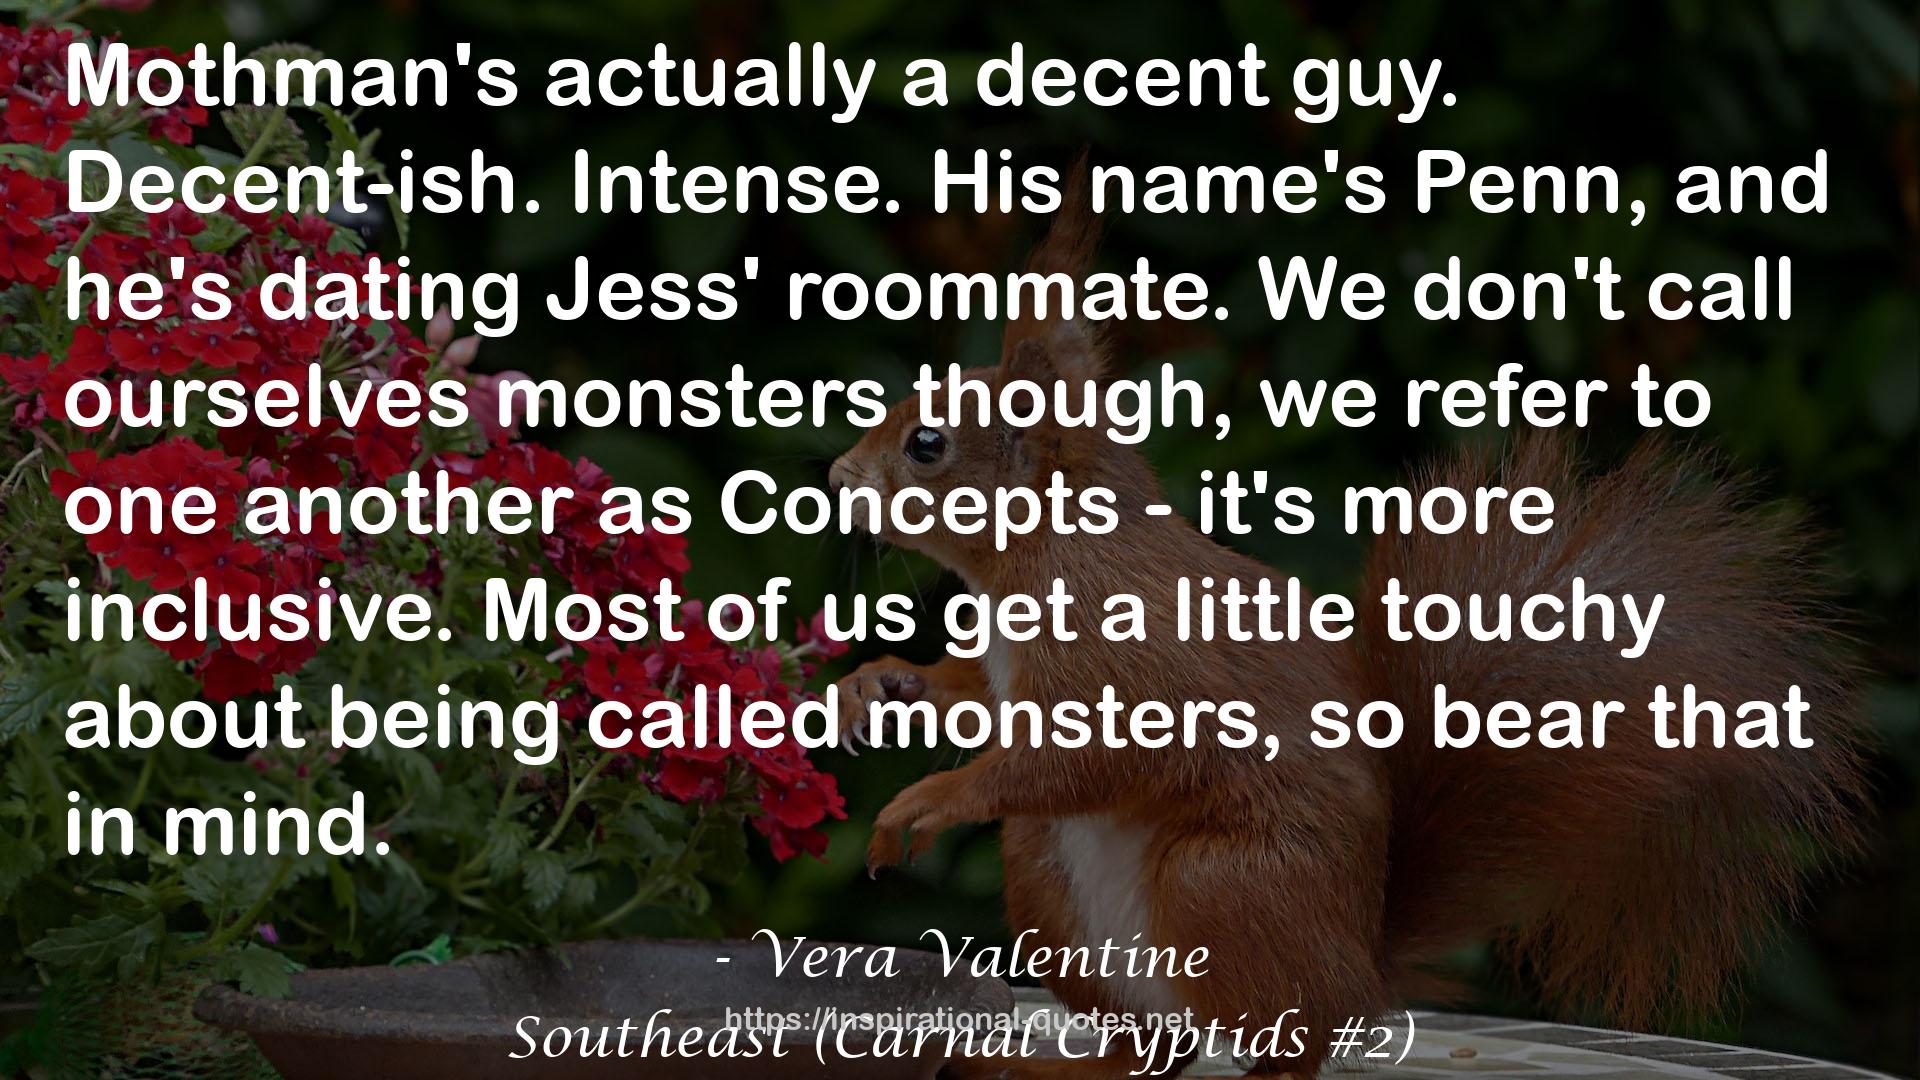 Southeast (Carnal Cryptids #2) QUOTES